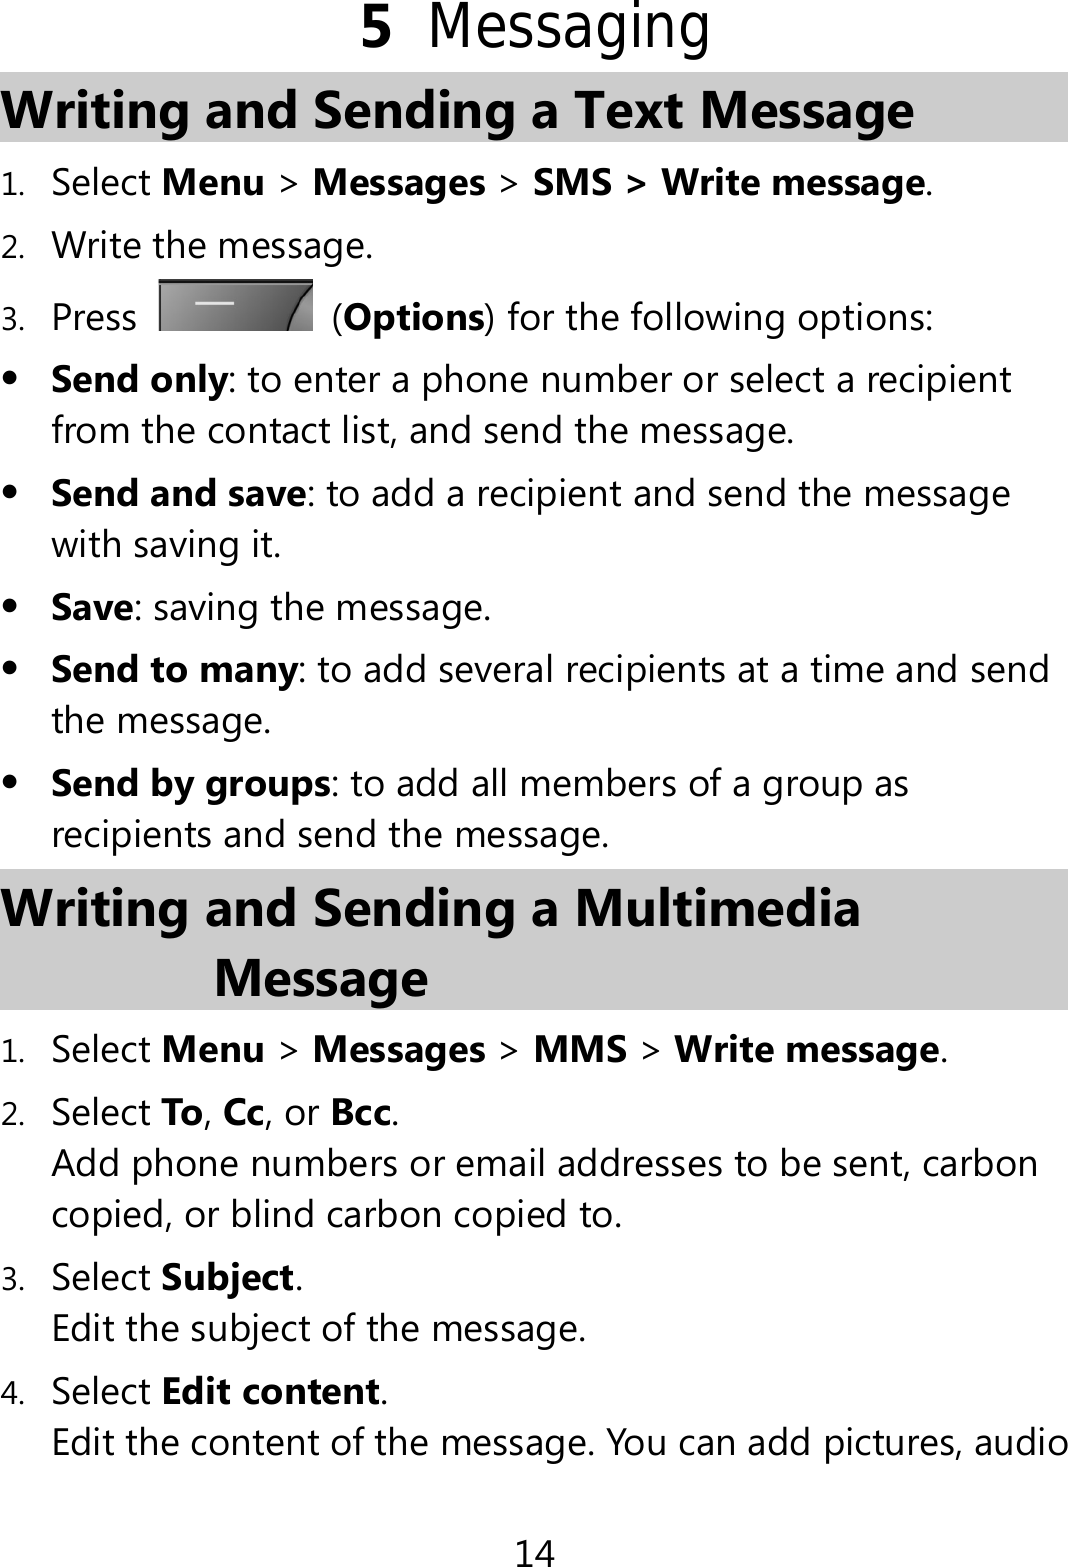 14 5  Messaging Writing and Sending a Text Message   1. Select Menu &gt; Messages &gt; SMS &gt; Write message. 2. Write the message. 3. Press   (Options) for the following options:  Send only: to enter a phone number or select a recipient from the contact list, and send the message.  Send and save: to add a recipient and send the message with saving it.  Save: saving the message.  Send to many: to add several recipients at a time and send the message.  Send by groups: to add all members of a group as recipients and send the message. Writing and Sending a Multimedia Message 1. Select Menu &gt; Messages &gt; MMS &gt; Write message. 2. Select To, Cc, or Bcc. Add phone numbers or email addresses to be sent, carbon copied, or blind carbon copied to. 3. Select Subject. Edit the subject of the message. 4. Select Edit content. Edit the content of the message. You can add pictures, audio 